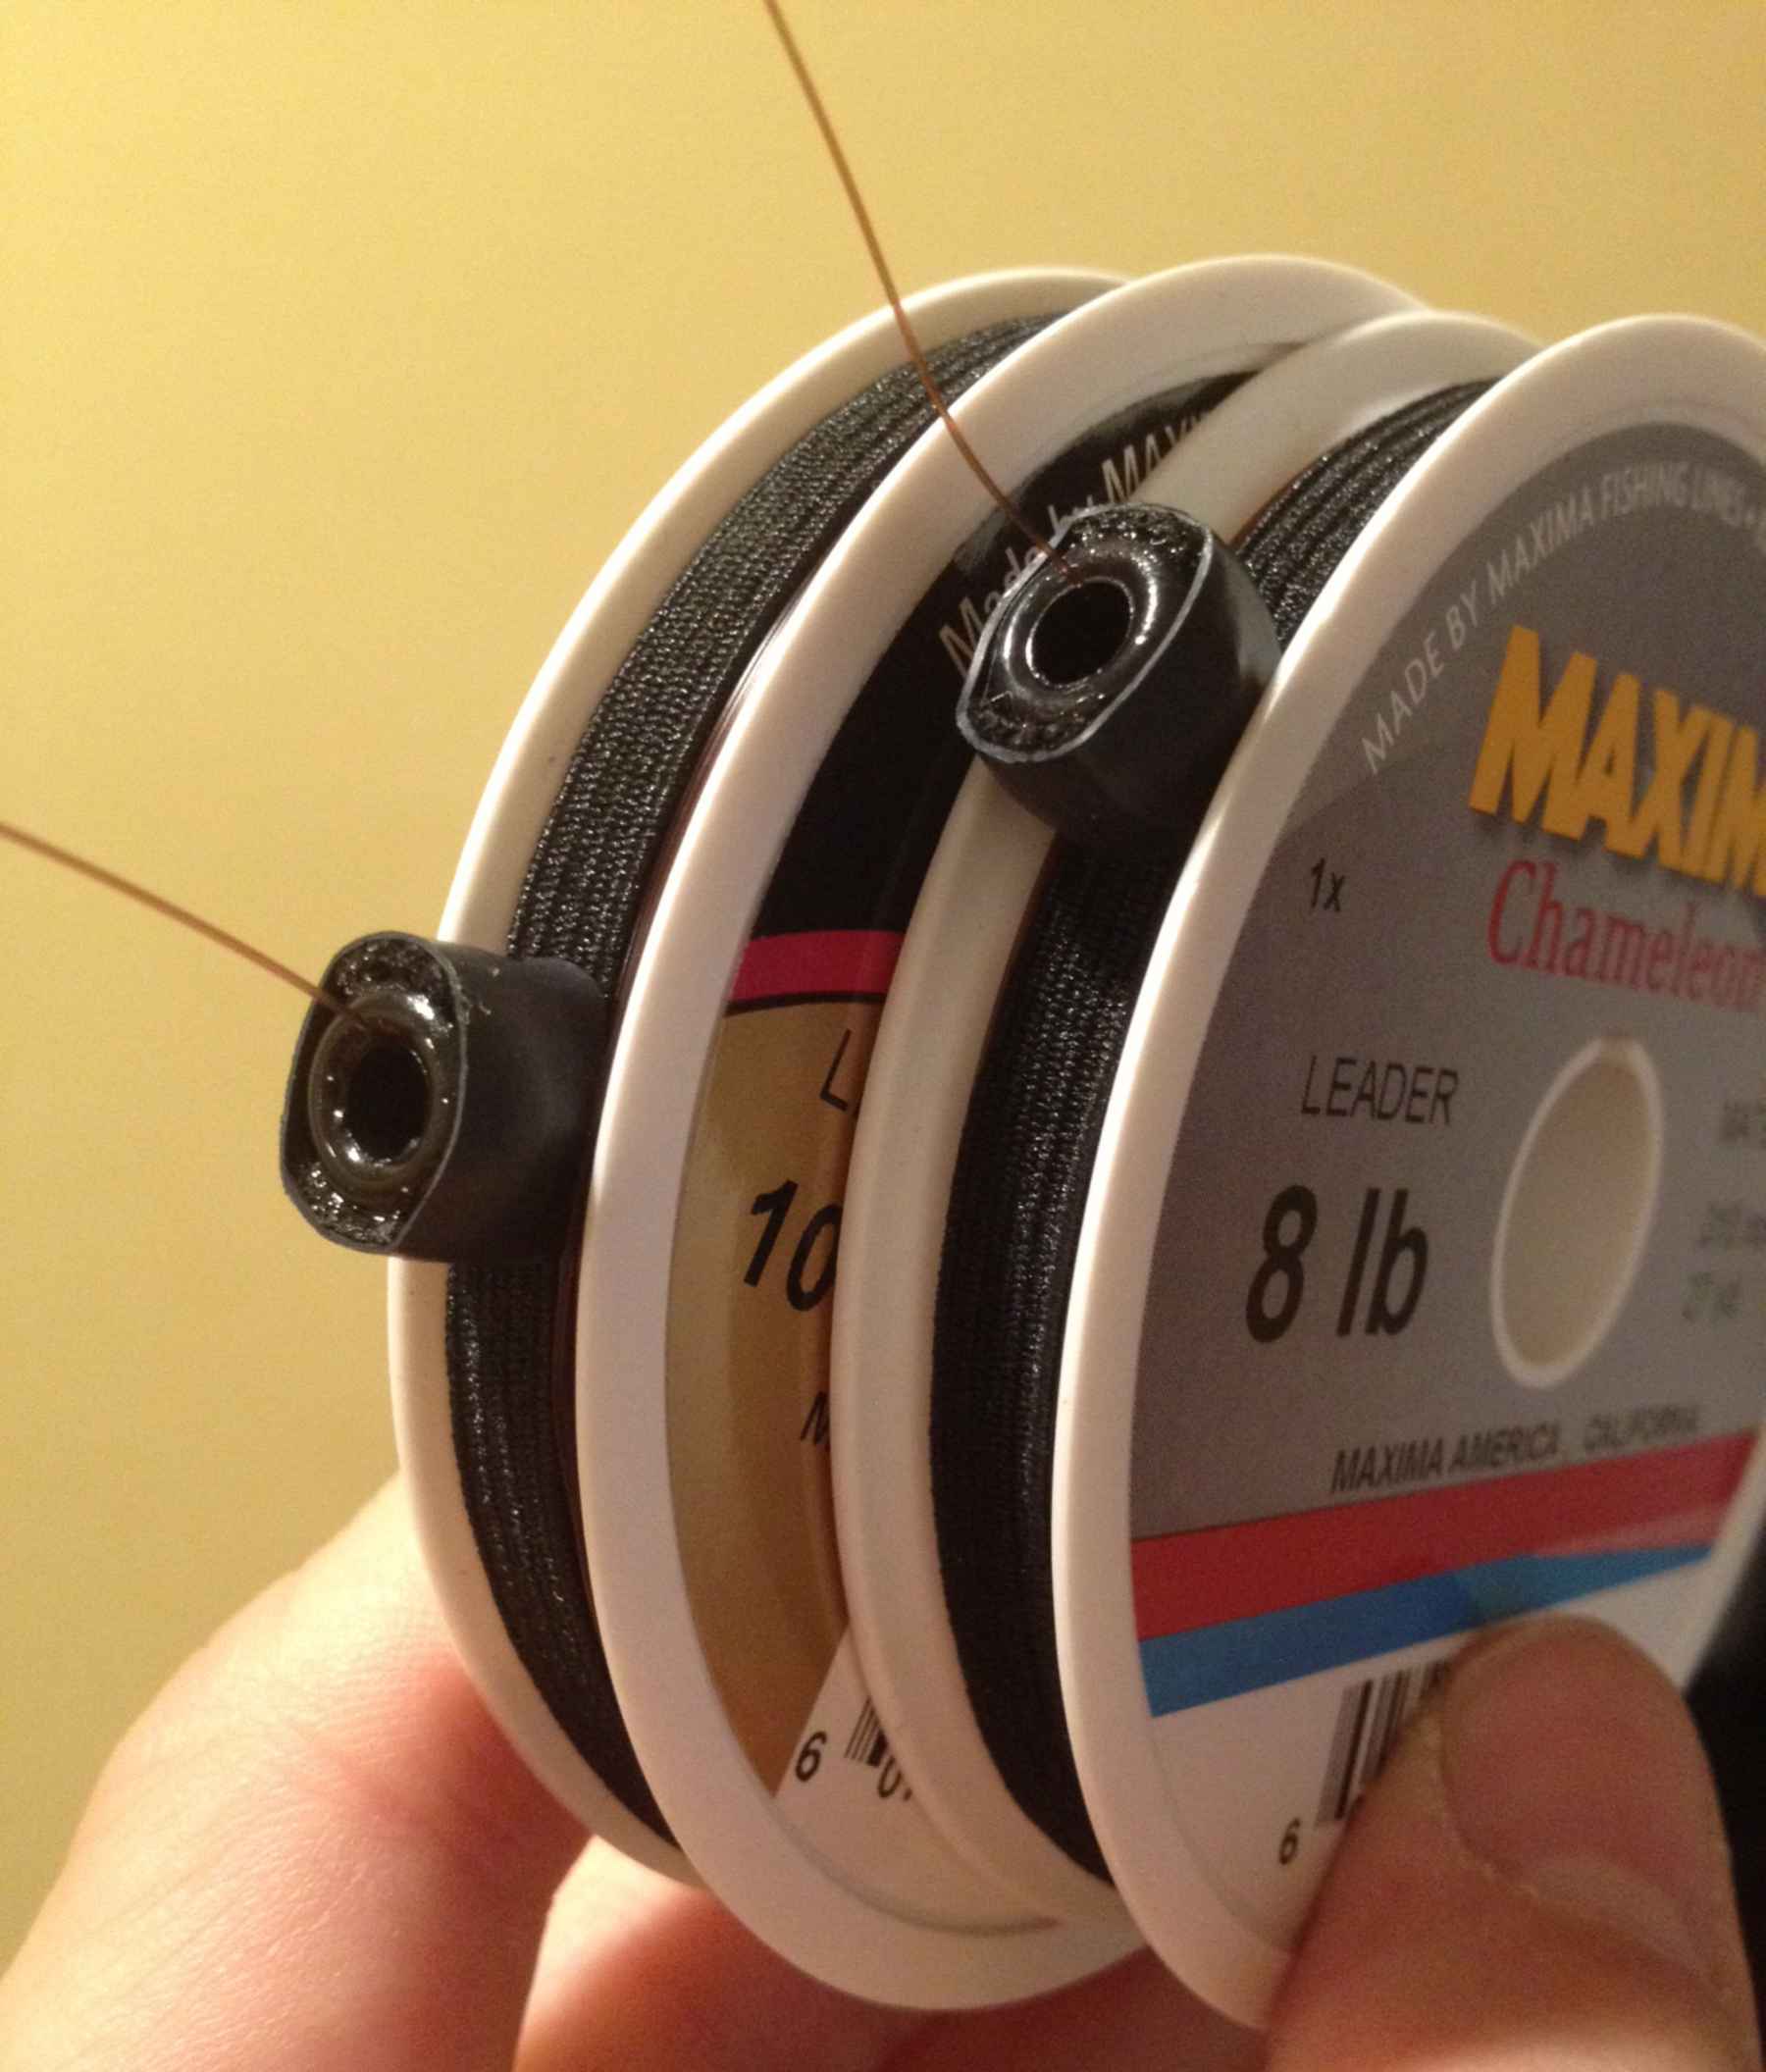 FYI: Spool Hands can take tippet spools, better than rubber bands